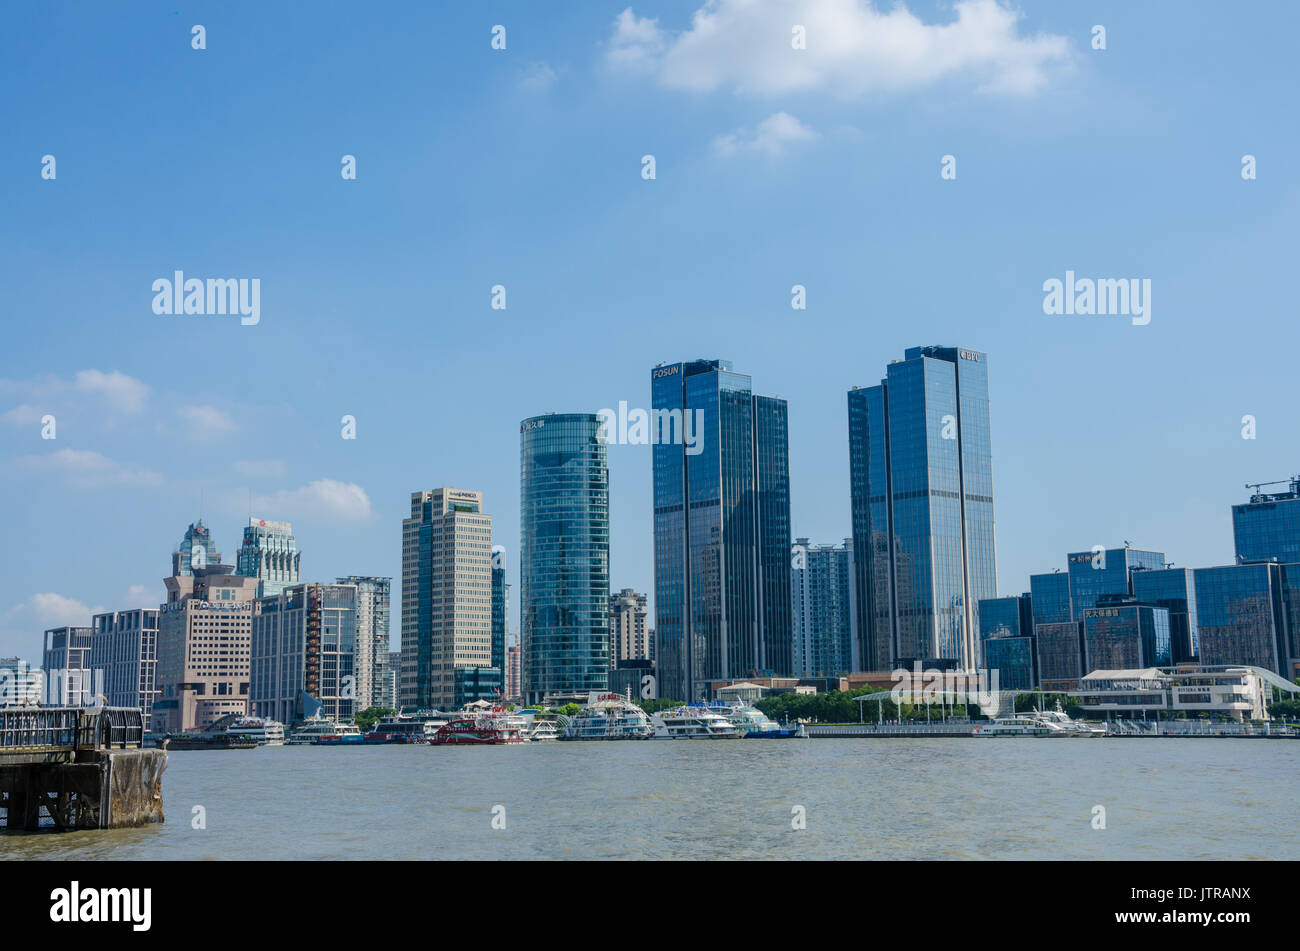 Looking across The River Huangpu at the skyscrapers on the opposite bank. Stock Photo